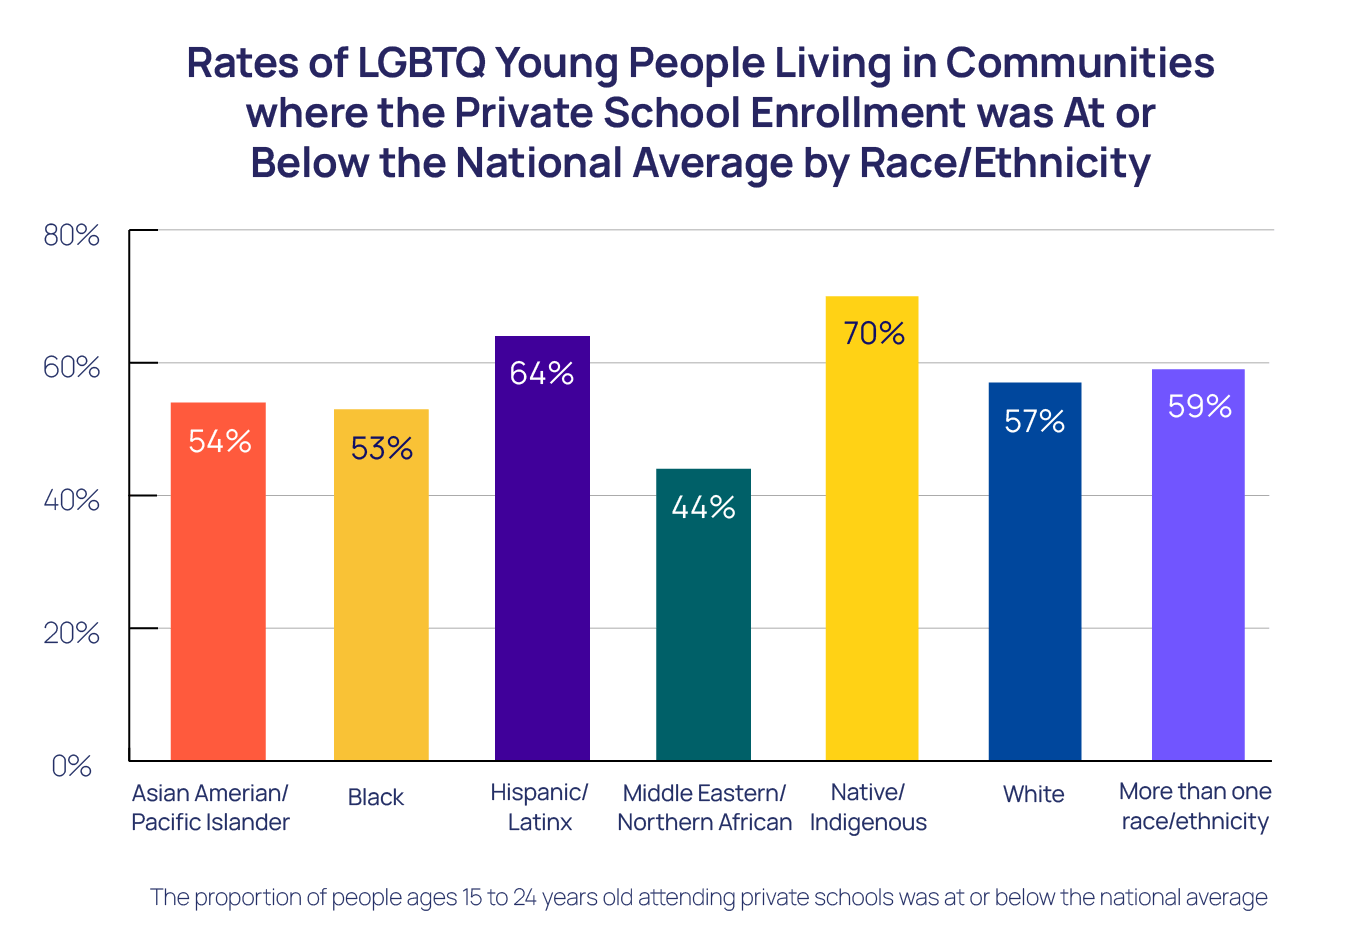 Rates of LGBTQ Young People Living in Communities where the Private School Enrollment was At or Below the National Average by Race/Ethnicity bar chart